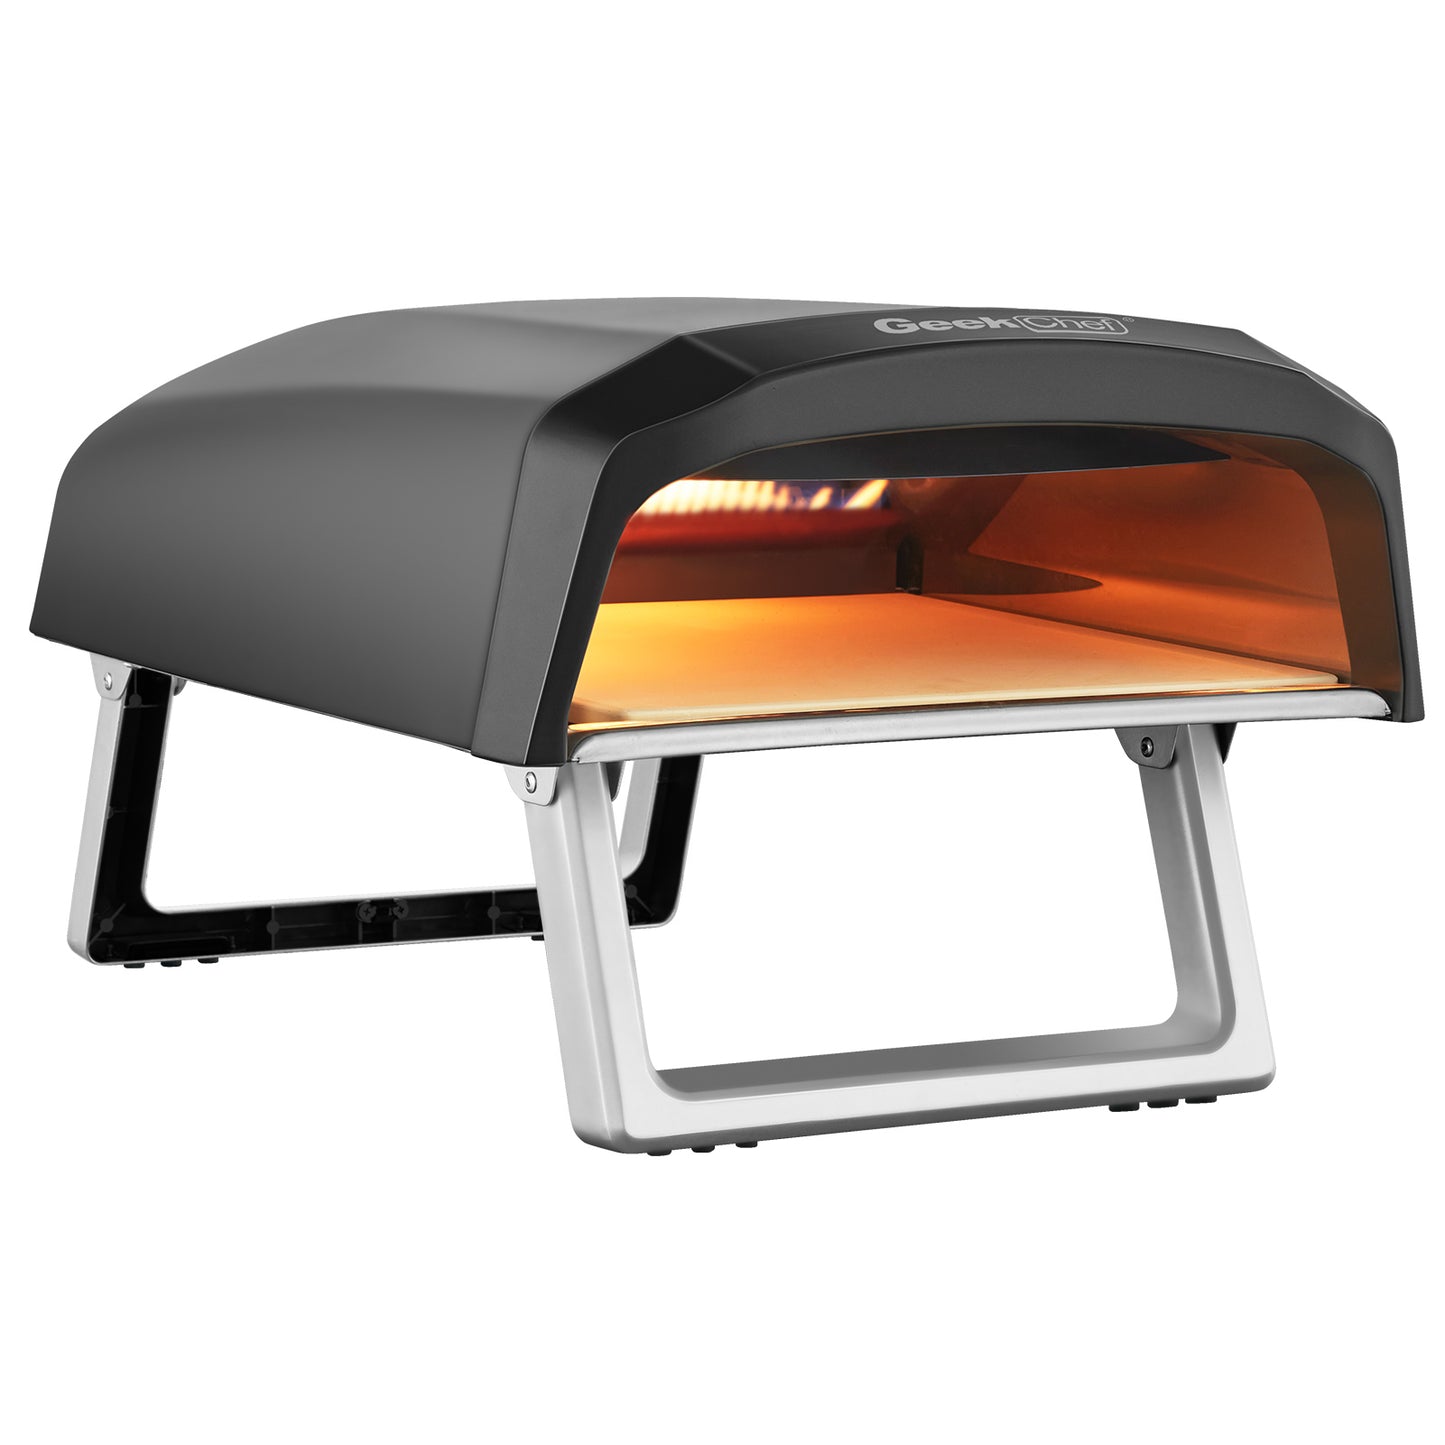 Geek Chef Gas Pizza Oven